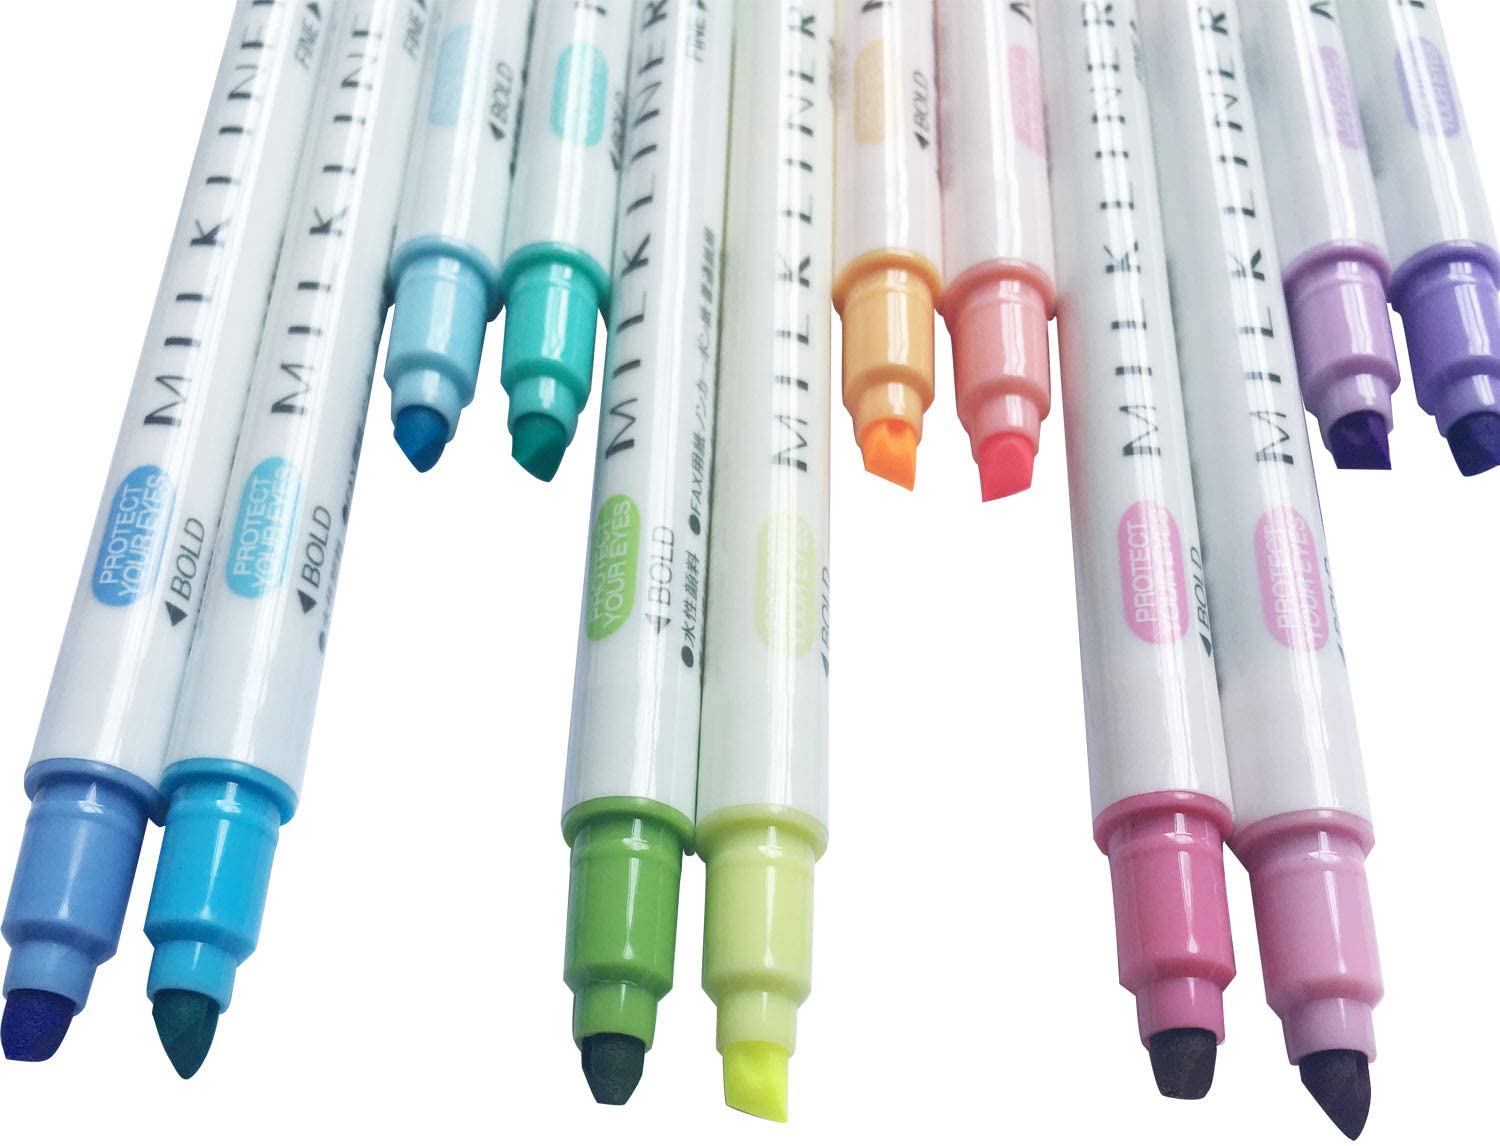 Colorful Milk-liner Highlighters Double Sides Writing for Office and School,Pack of 12 - e4cents